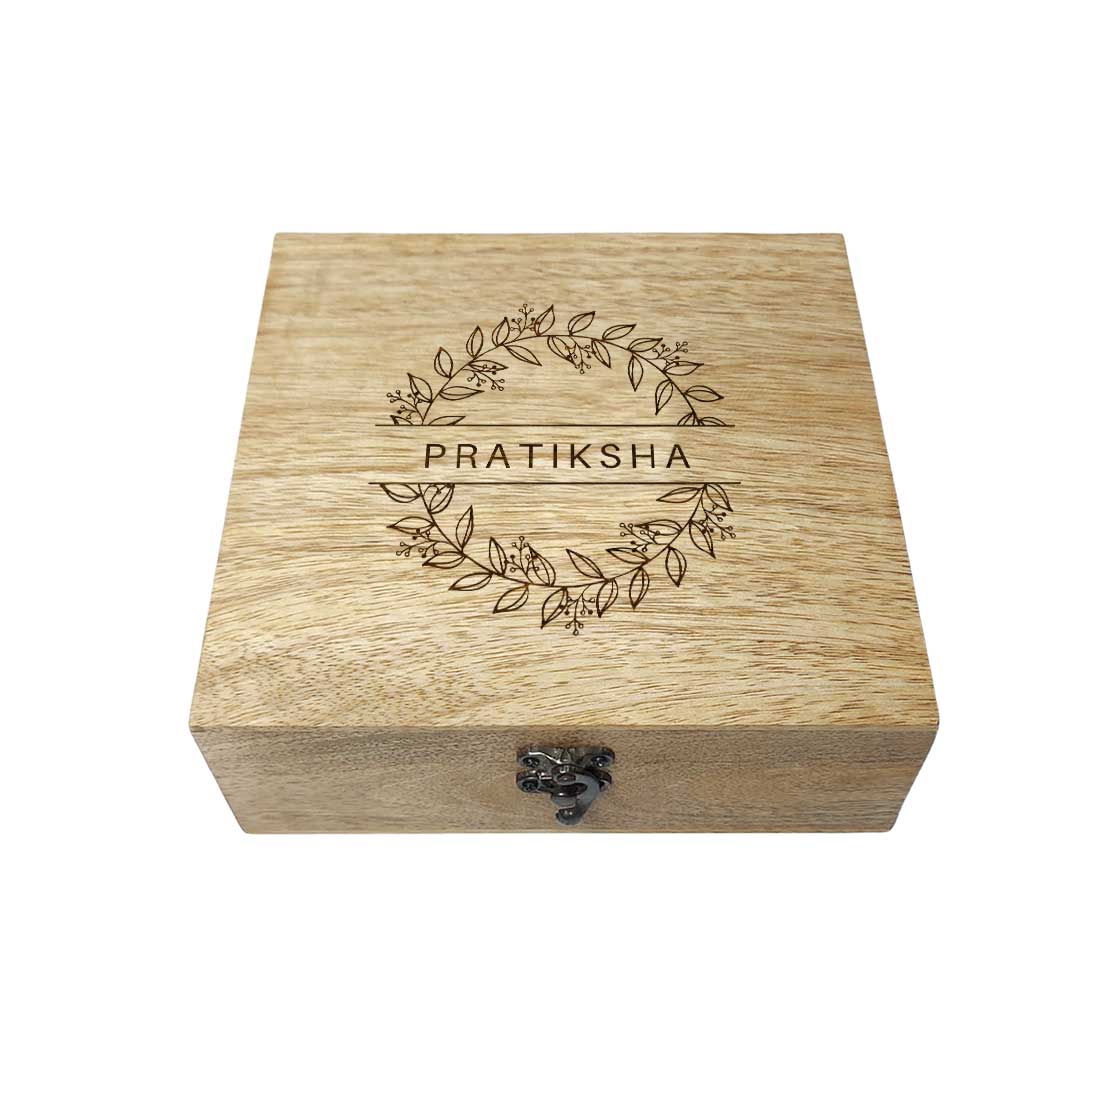 Personalised Wooden Gift Box With Engraving - Leaf Design